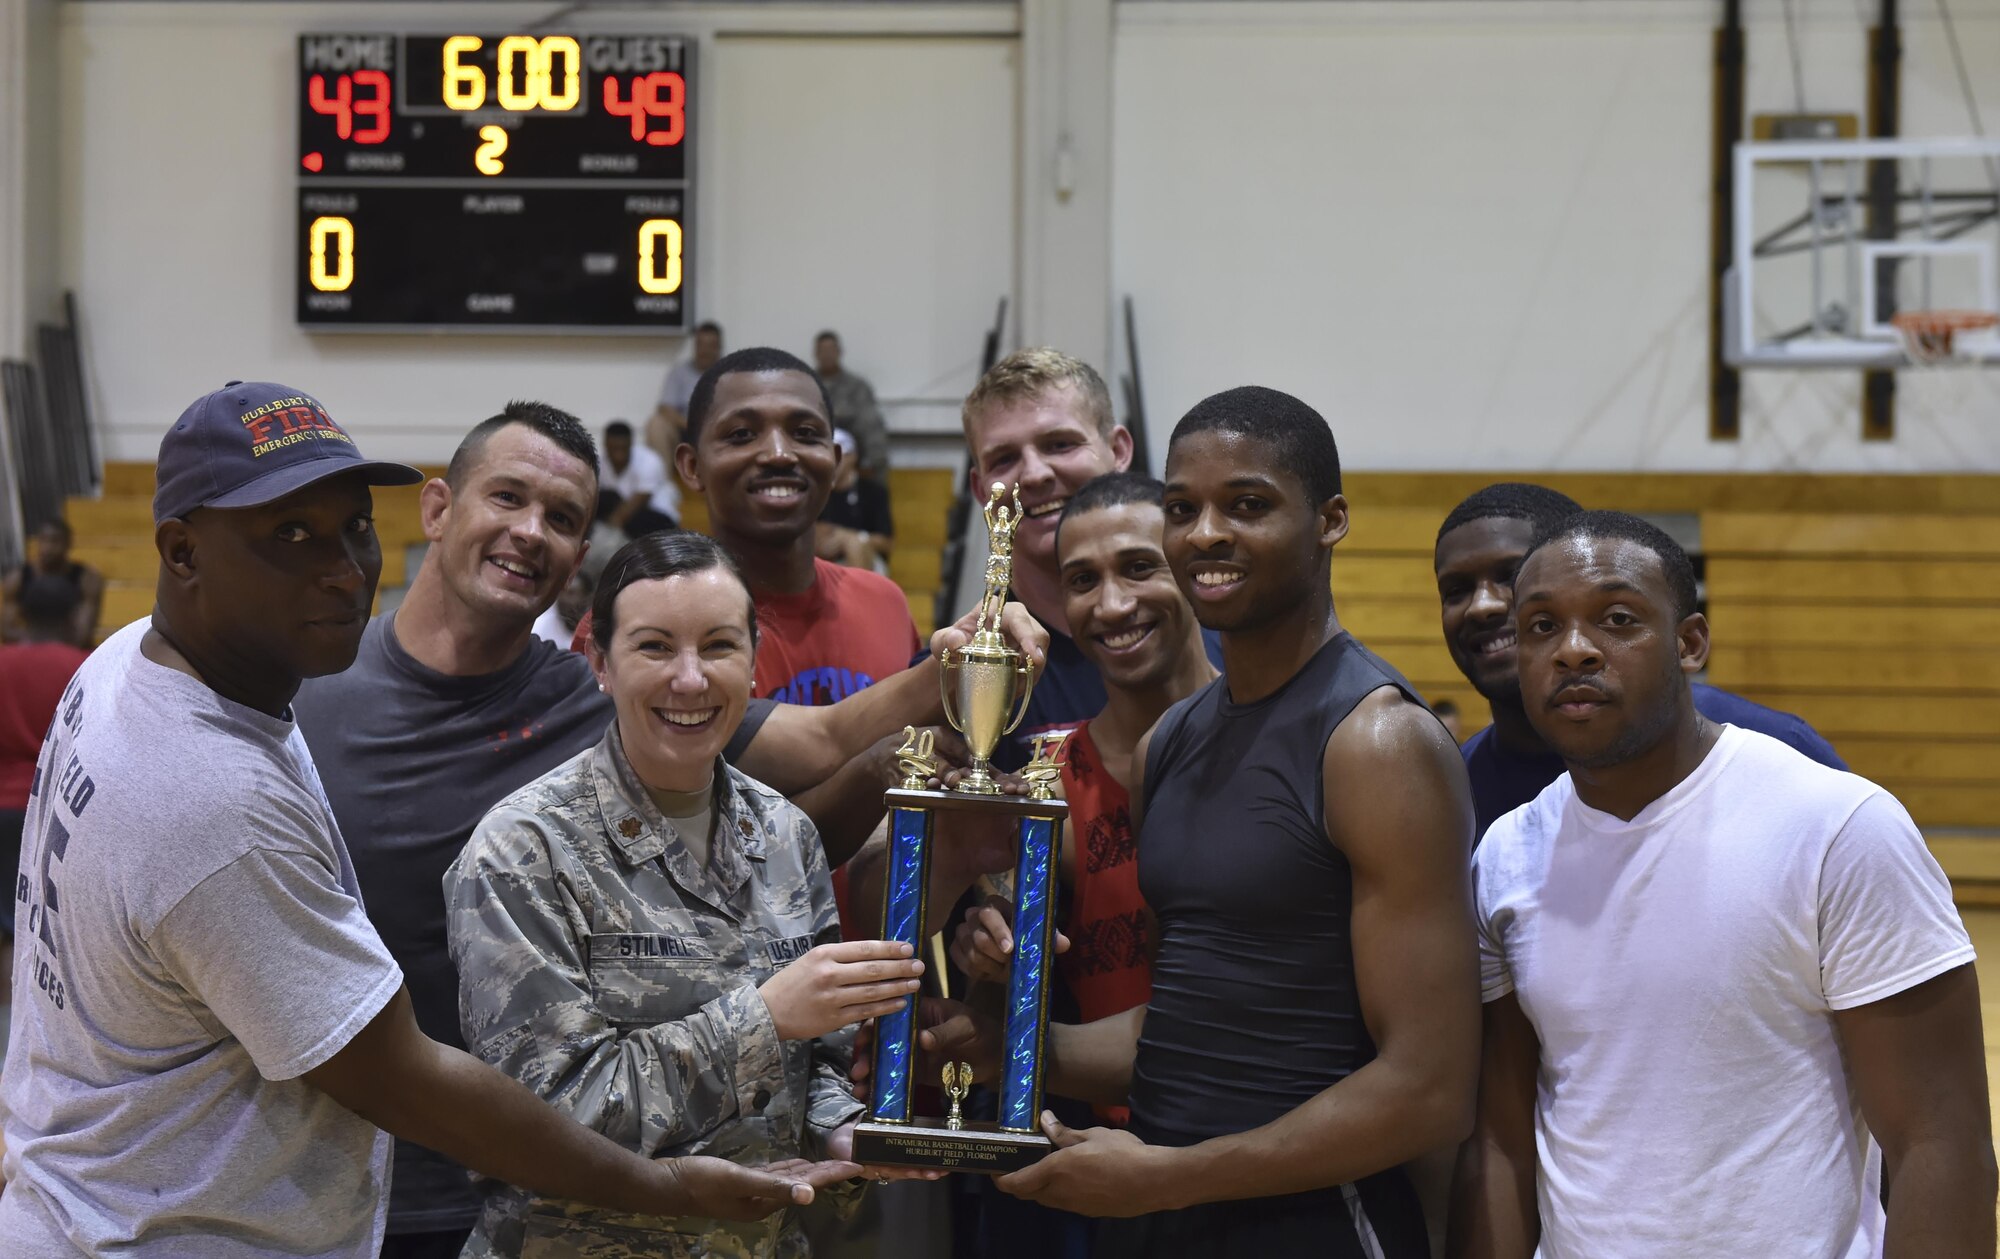 The 1st Special Operations Civil Engineer Squadron basketball team celebrate with the first place trophy after the intramural basketball championship at the Aderholt Fitness Center on Hurlburt Field, Fla., April 6, 2017. The 1st SOCES bested the 1st Special Operations Medical Group by the score of 49 to 43. (U.S. Air Force photo by Airman 1st Class Joseph Pick)